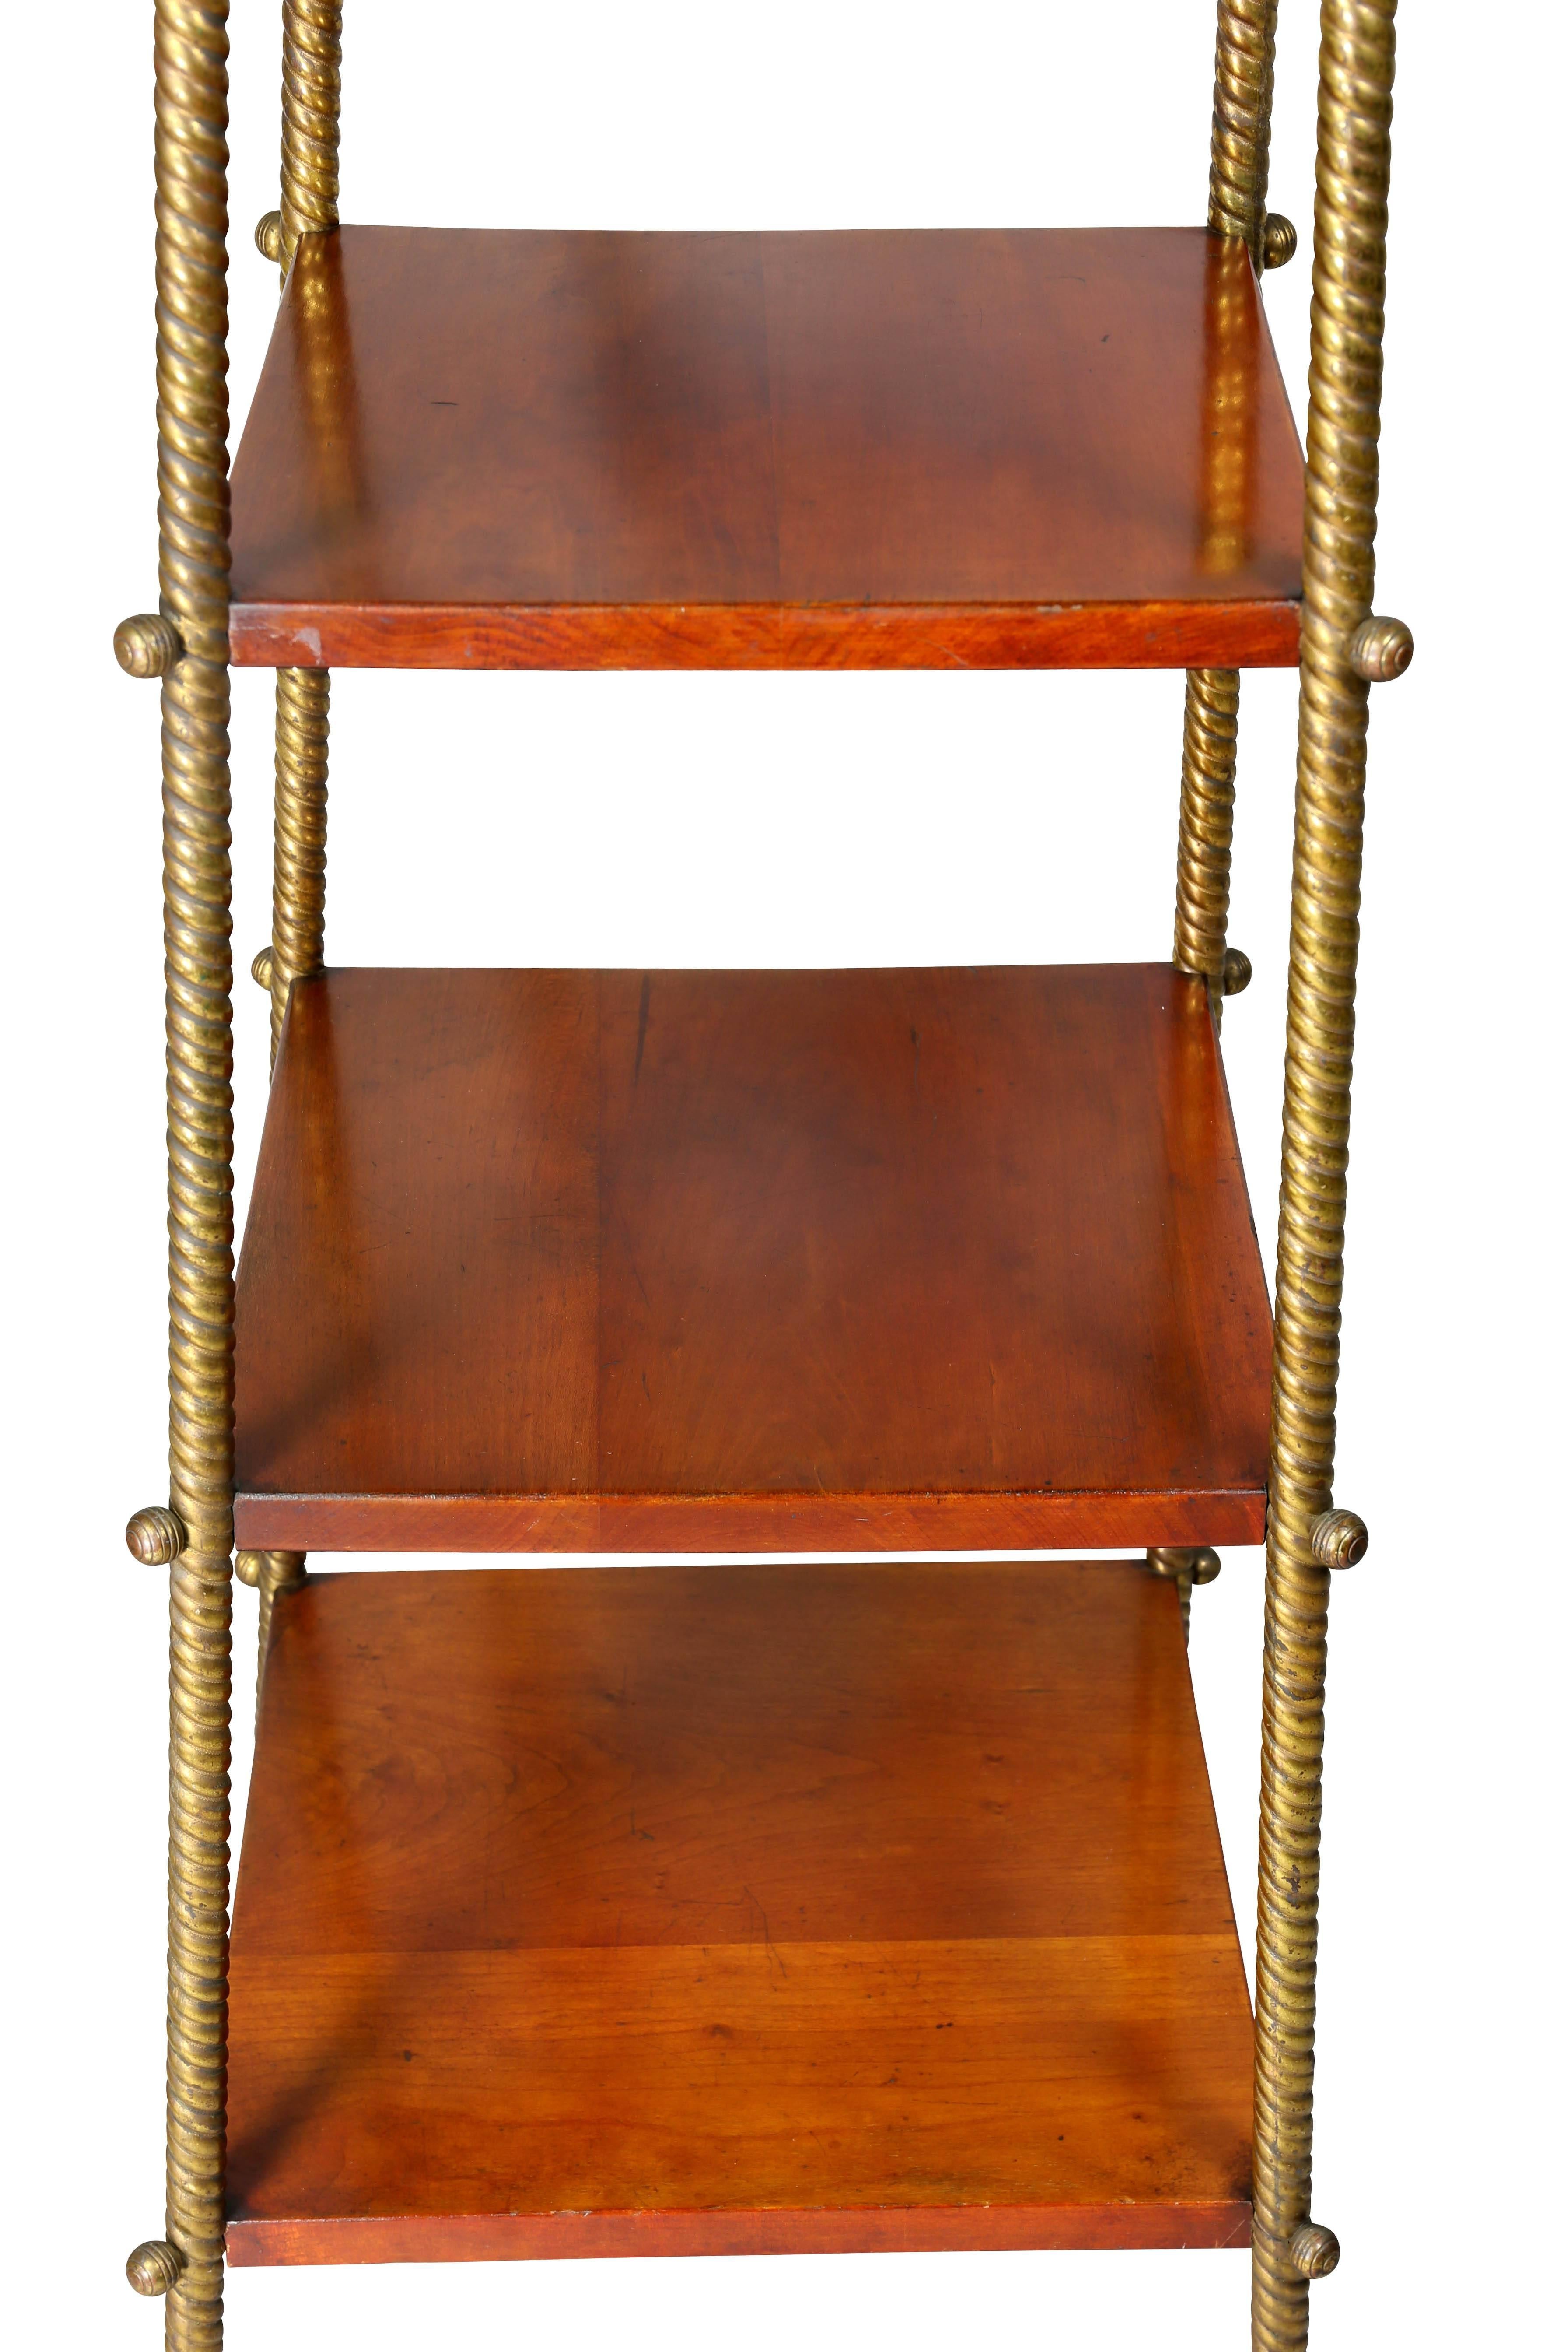 20th Century American Aesthetic Brass and Cherry Etagere